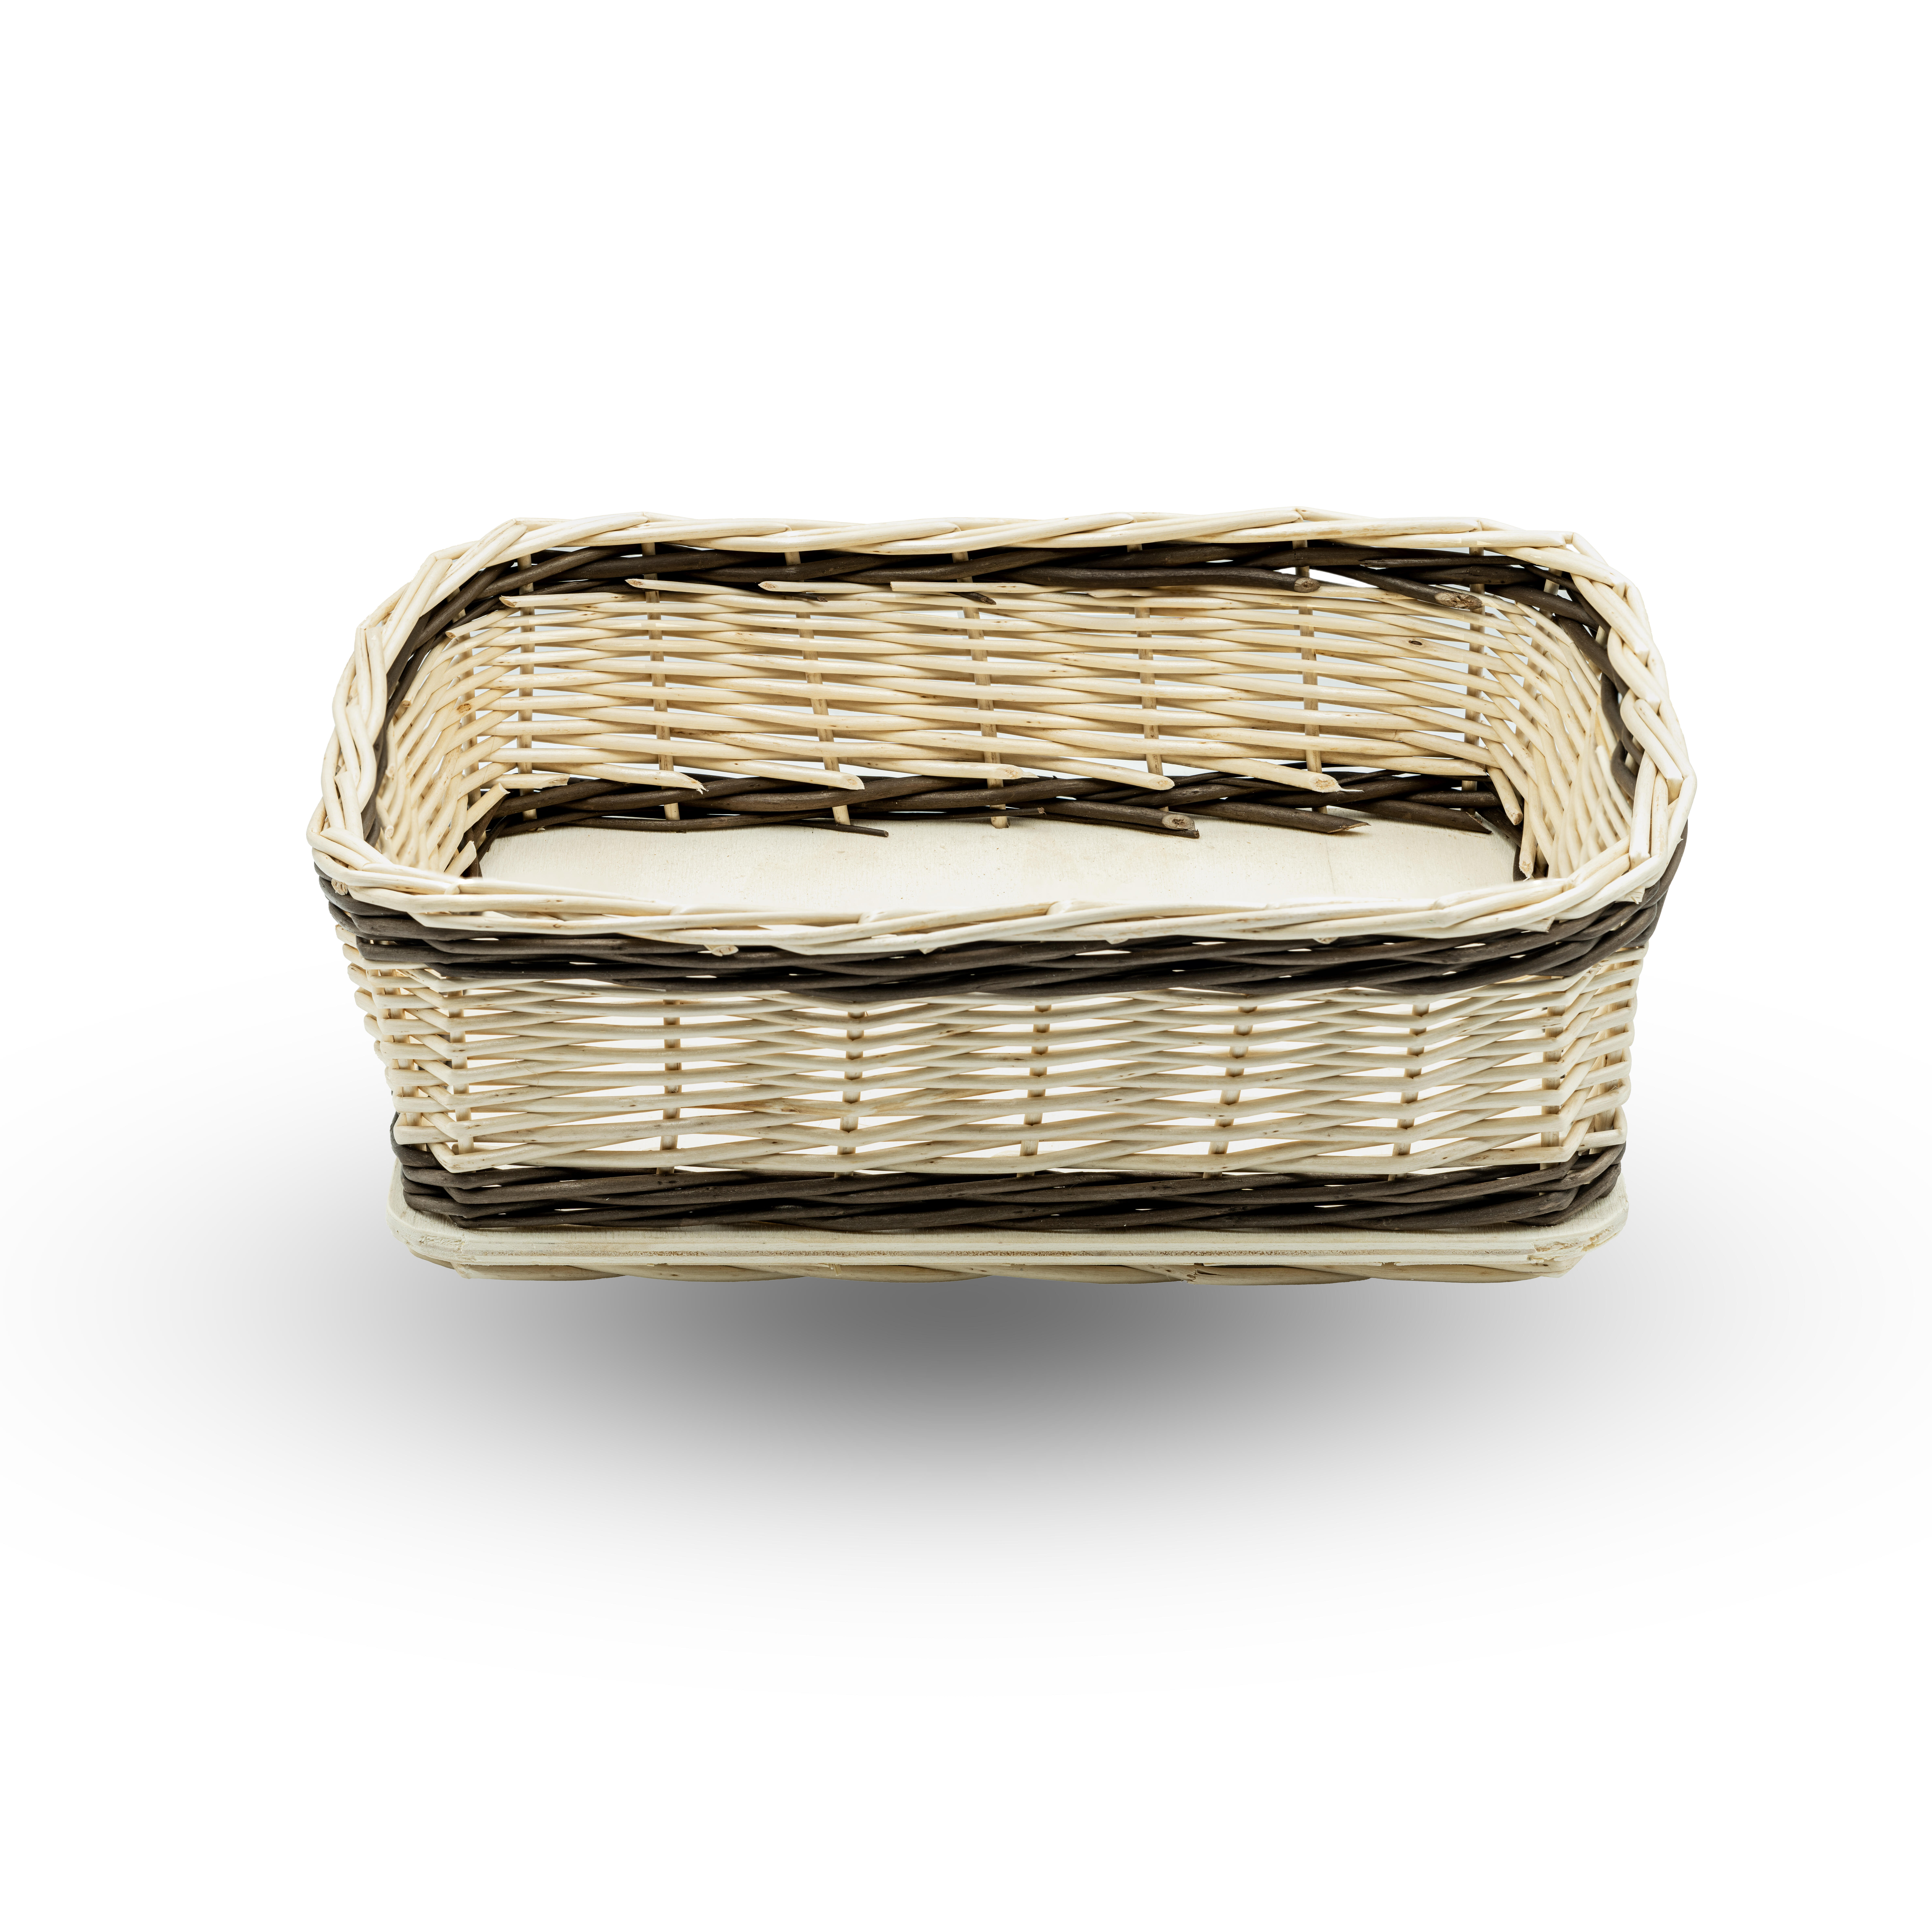 Wicker basket with wooden base